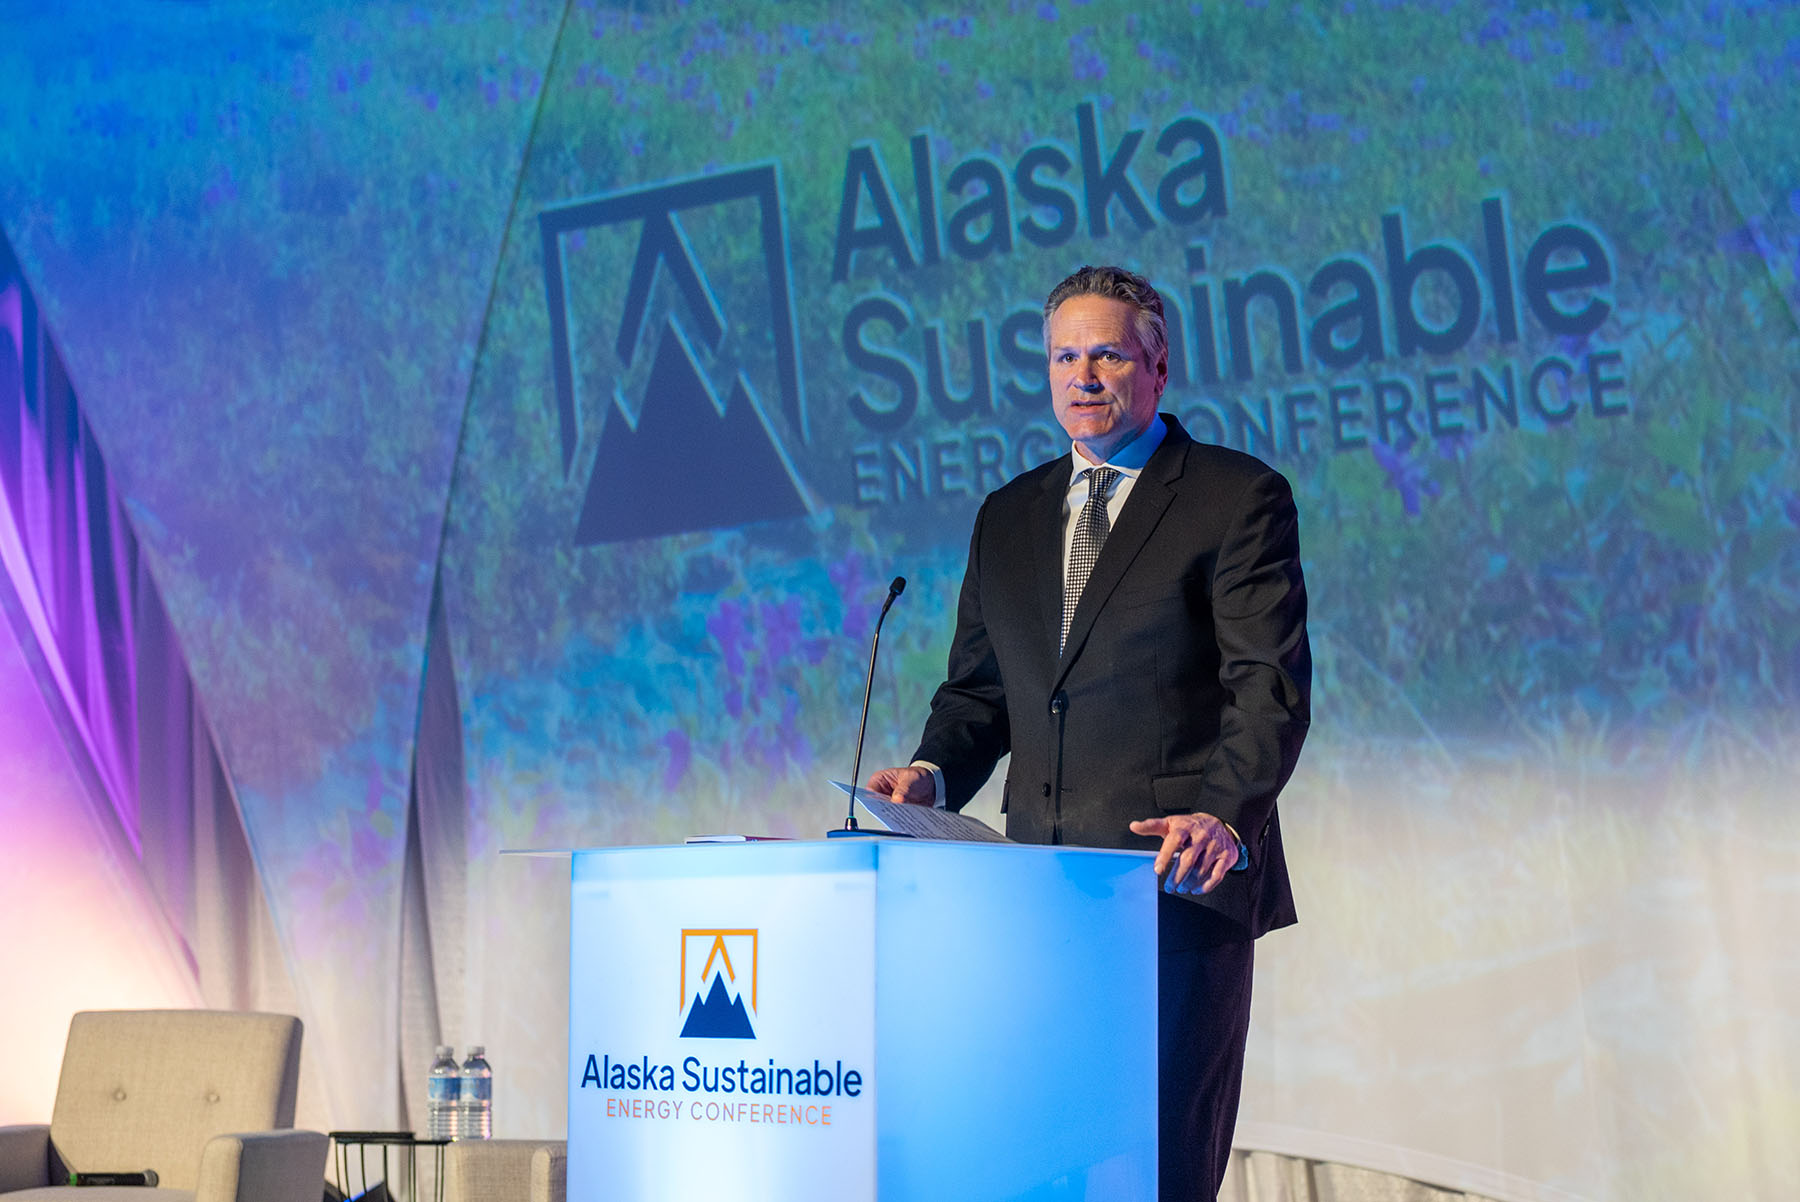 Governor Dunleavy speaks at the Alaska Sustainable Energy Conference – this annual event draws energy developers and investors to Alaska each year.